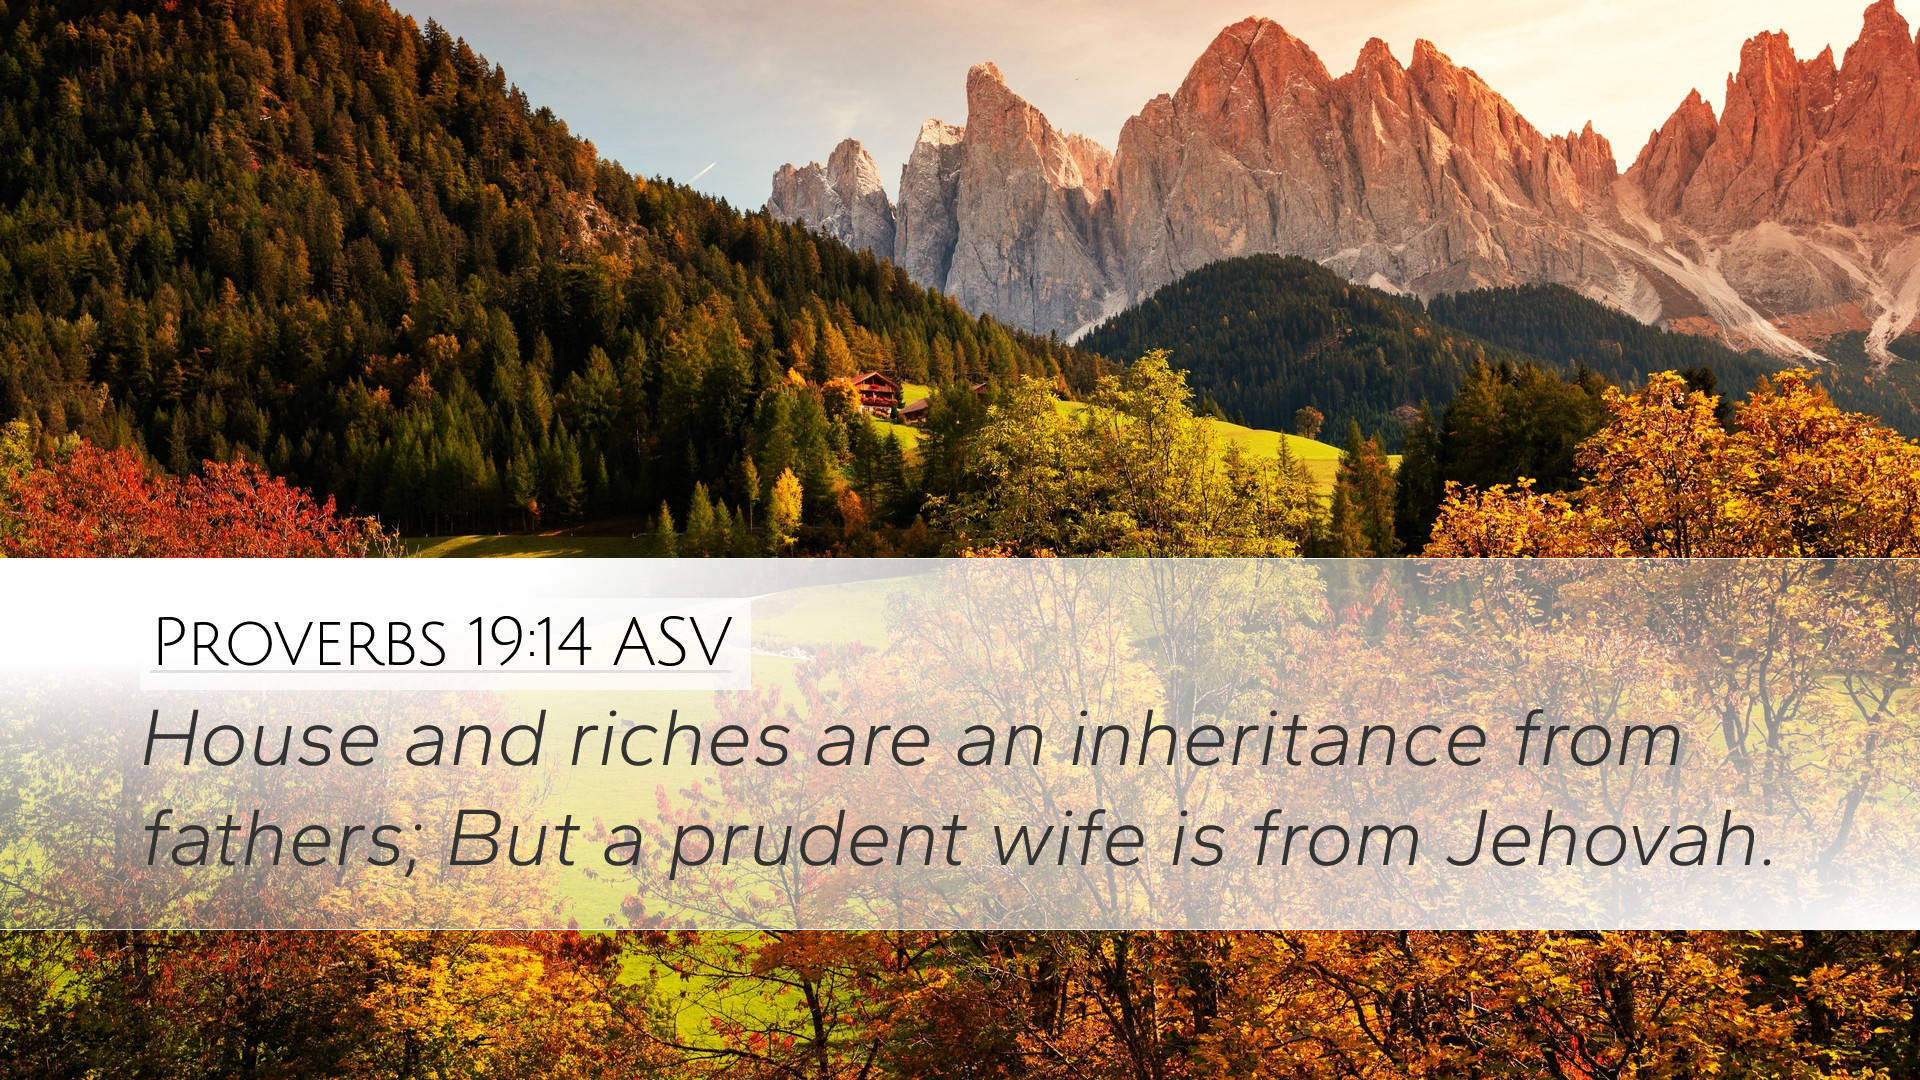 Prudentwife Jehovah: Försiktig Hustru Jehova. (note: This Translation Does Not Relate To Computer Or Mobile Wallpaper As It Is A Name Or Phrase. If You Could Provide Further Context, I Can Provide A More Accurate Translation.) Wallpaper